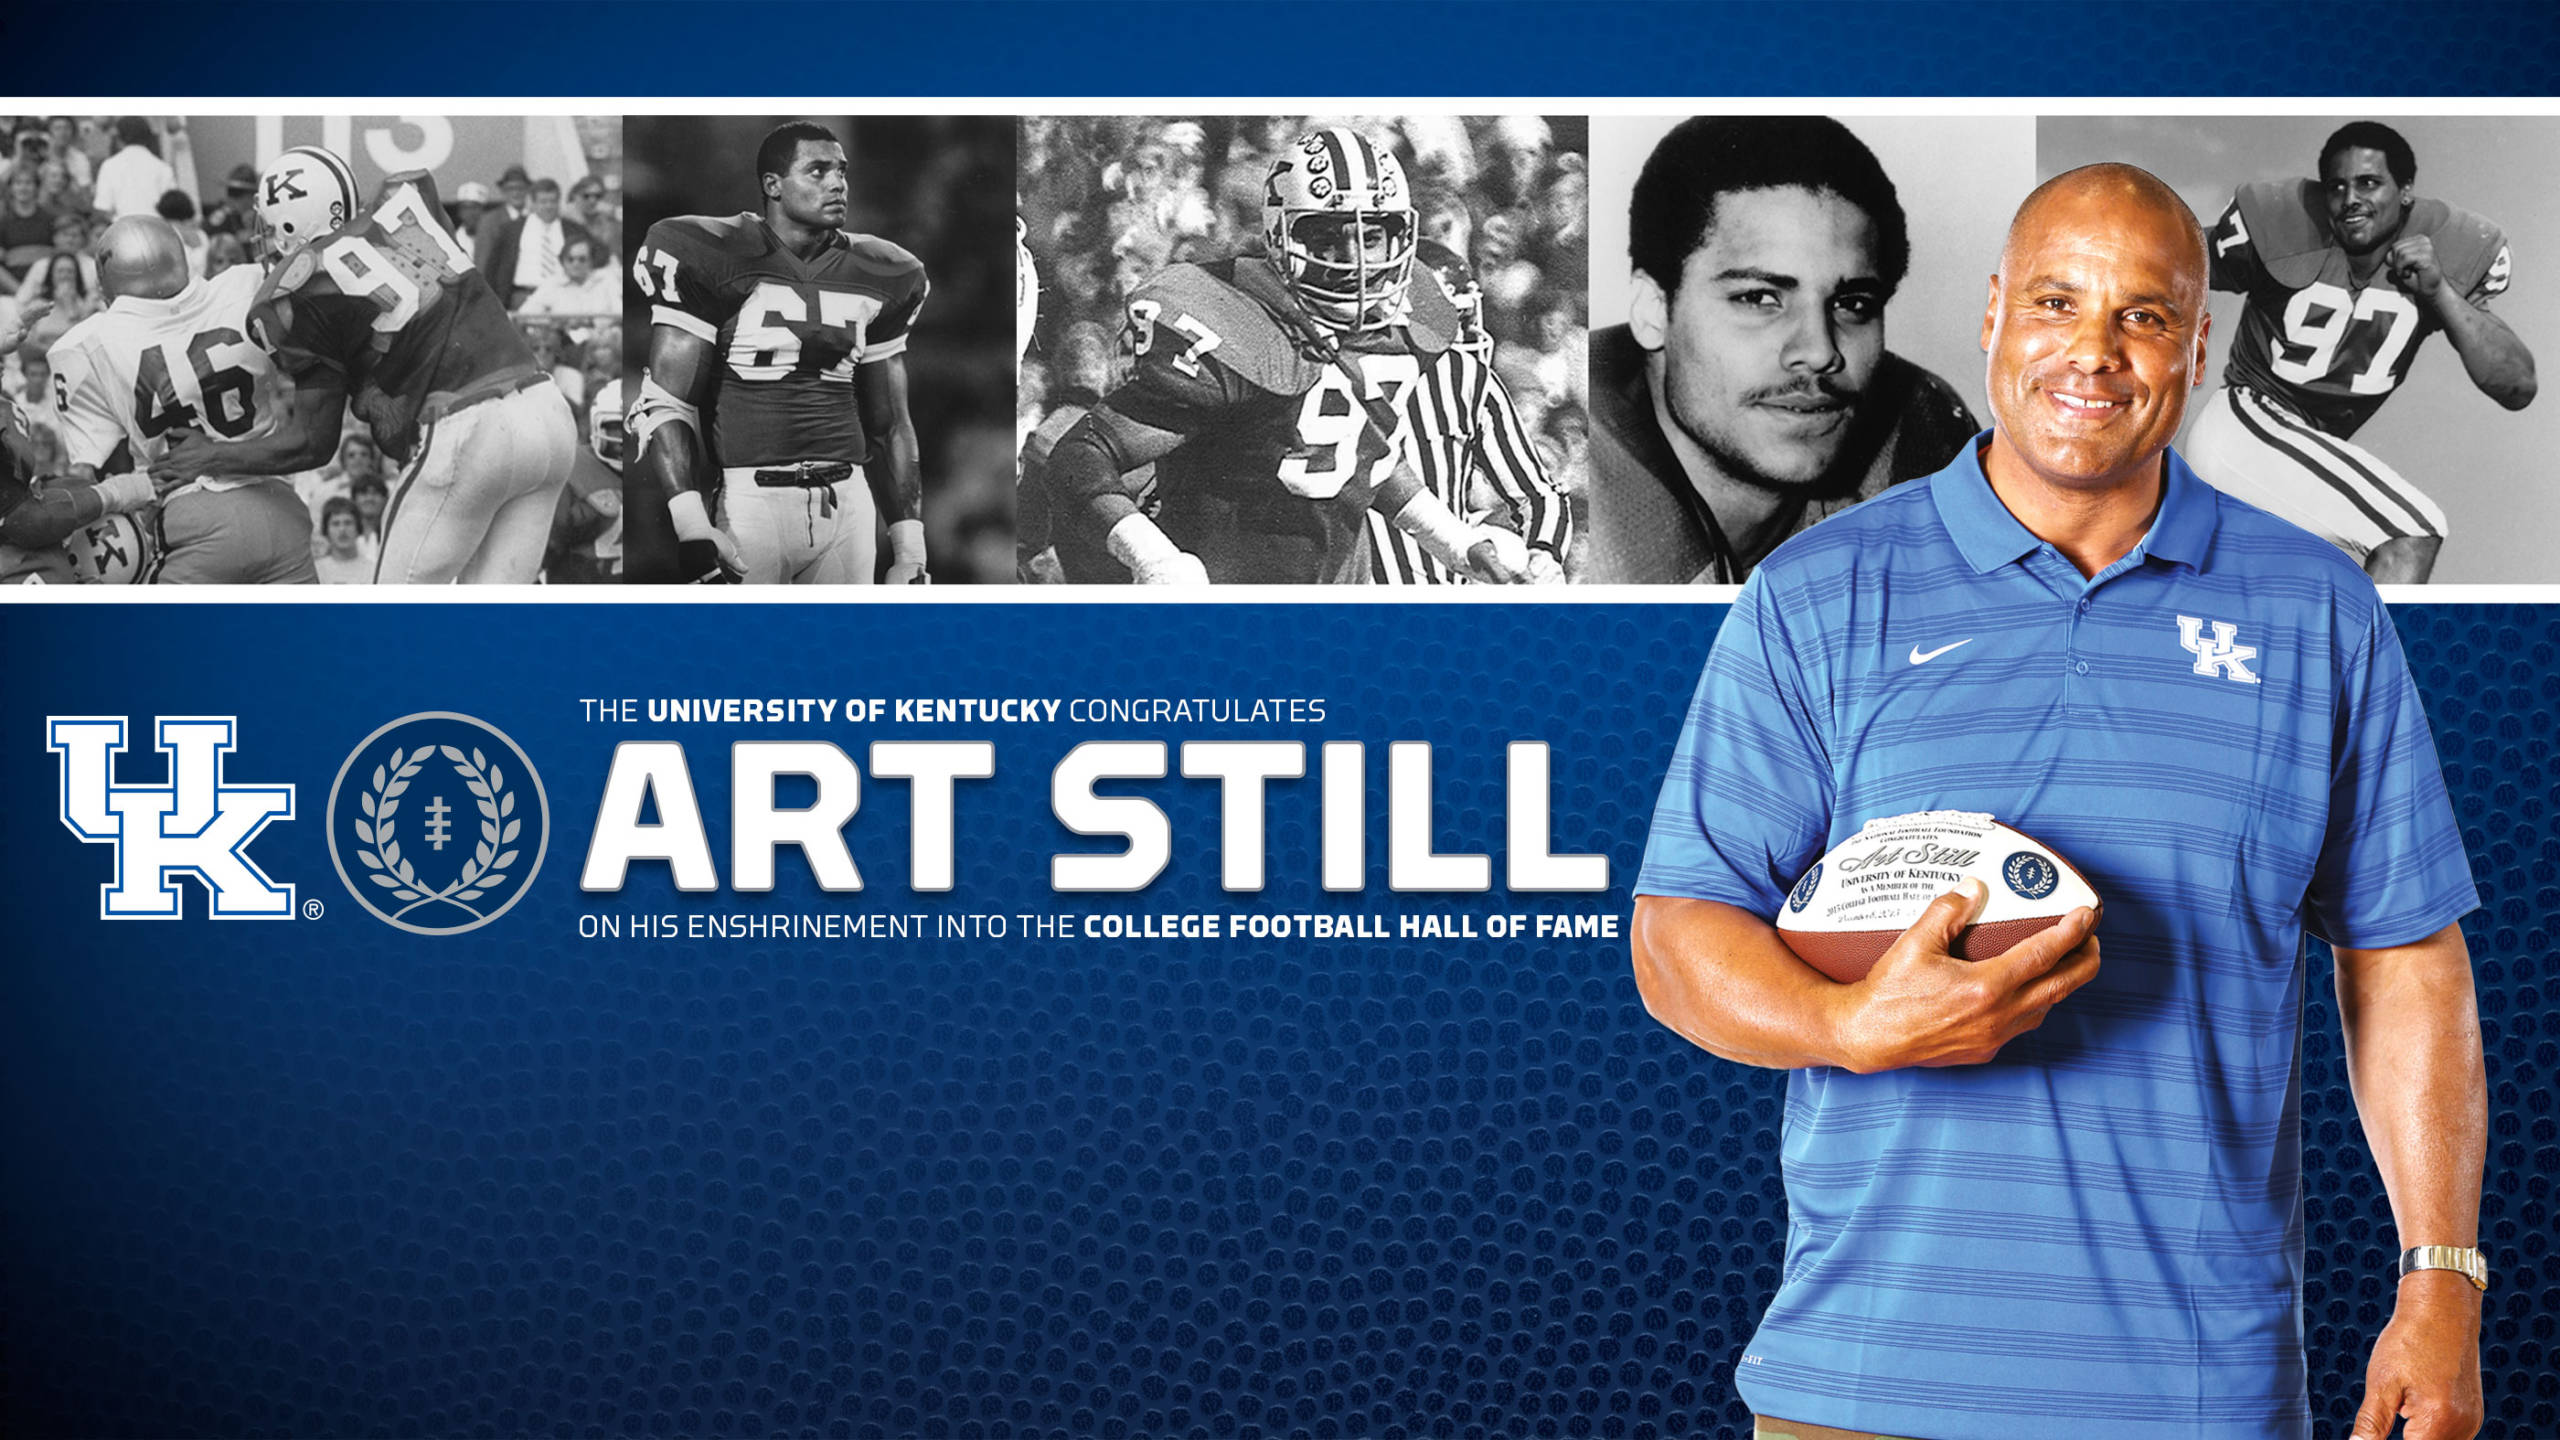 Art Still to be Inducted into College Football Hall of Fame